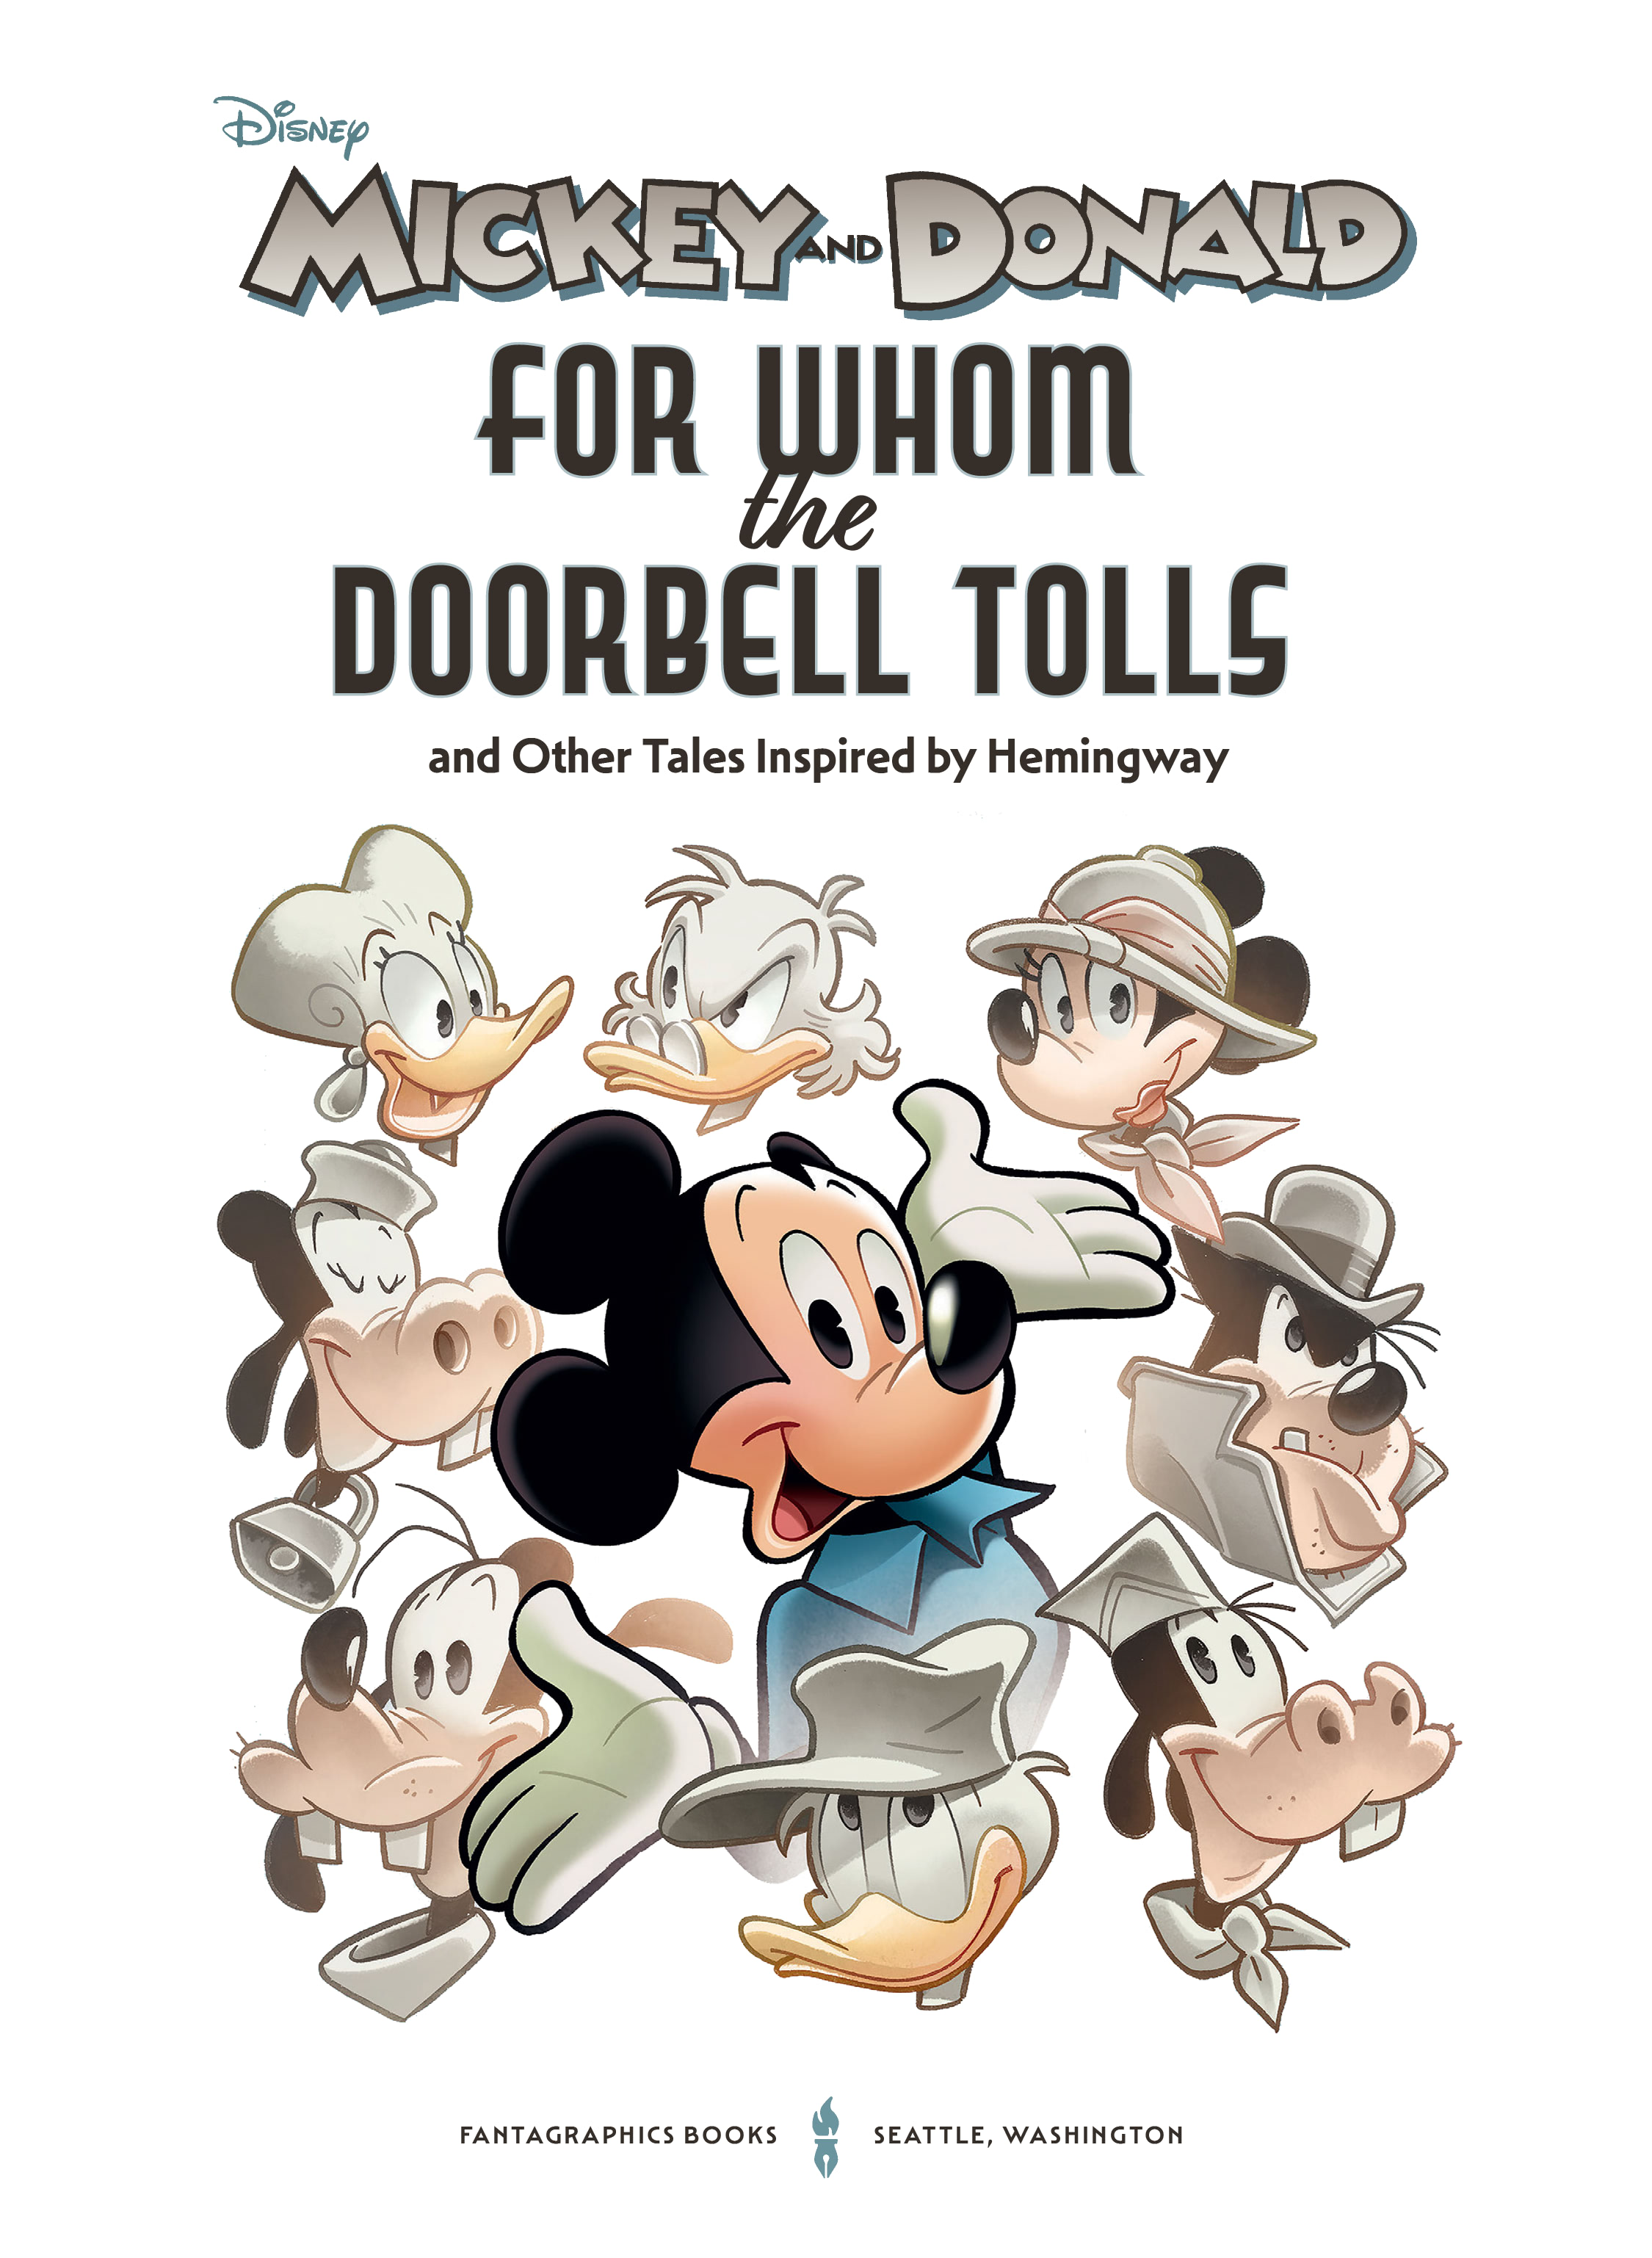 Read online Walt Disney's Mickey and Donald: "For Whom the Doorbell Tolls" and Other Tales Inspired by Hemingway comic -  Issue # TPB (Part 1) - 4